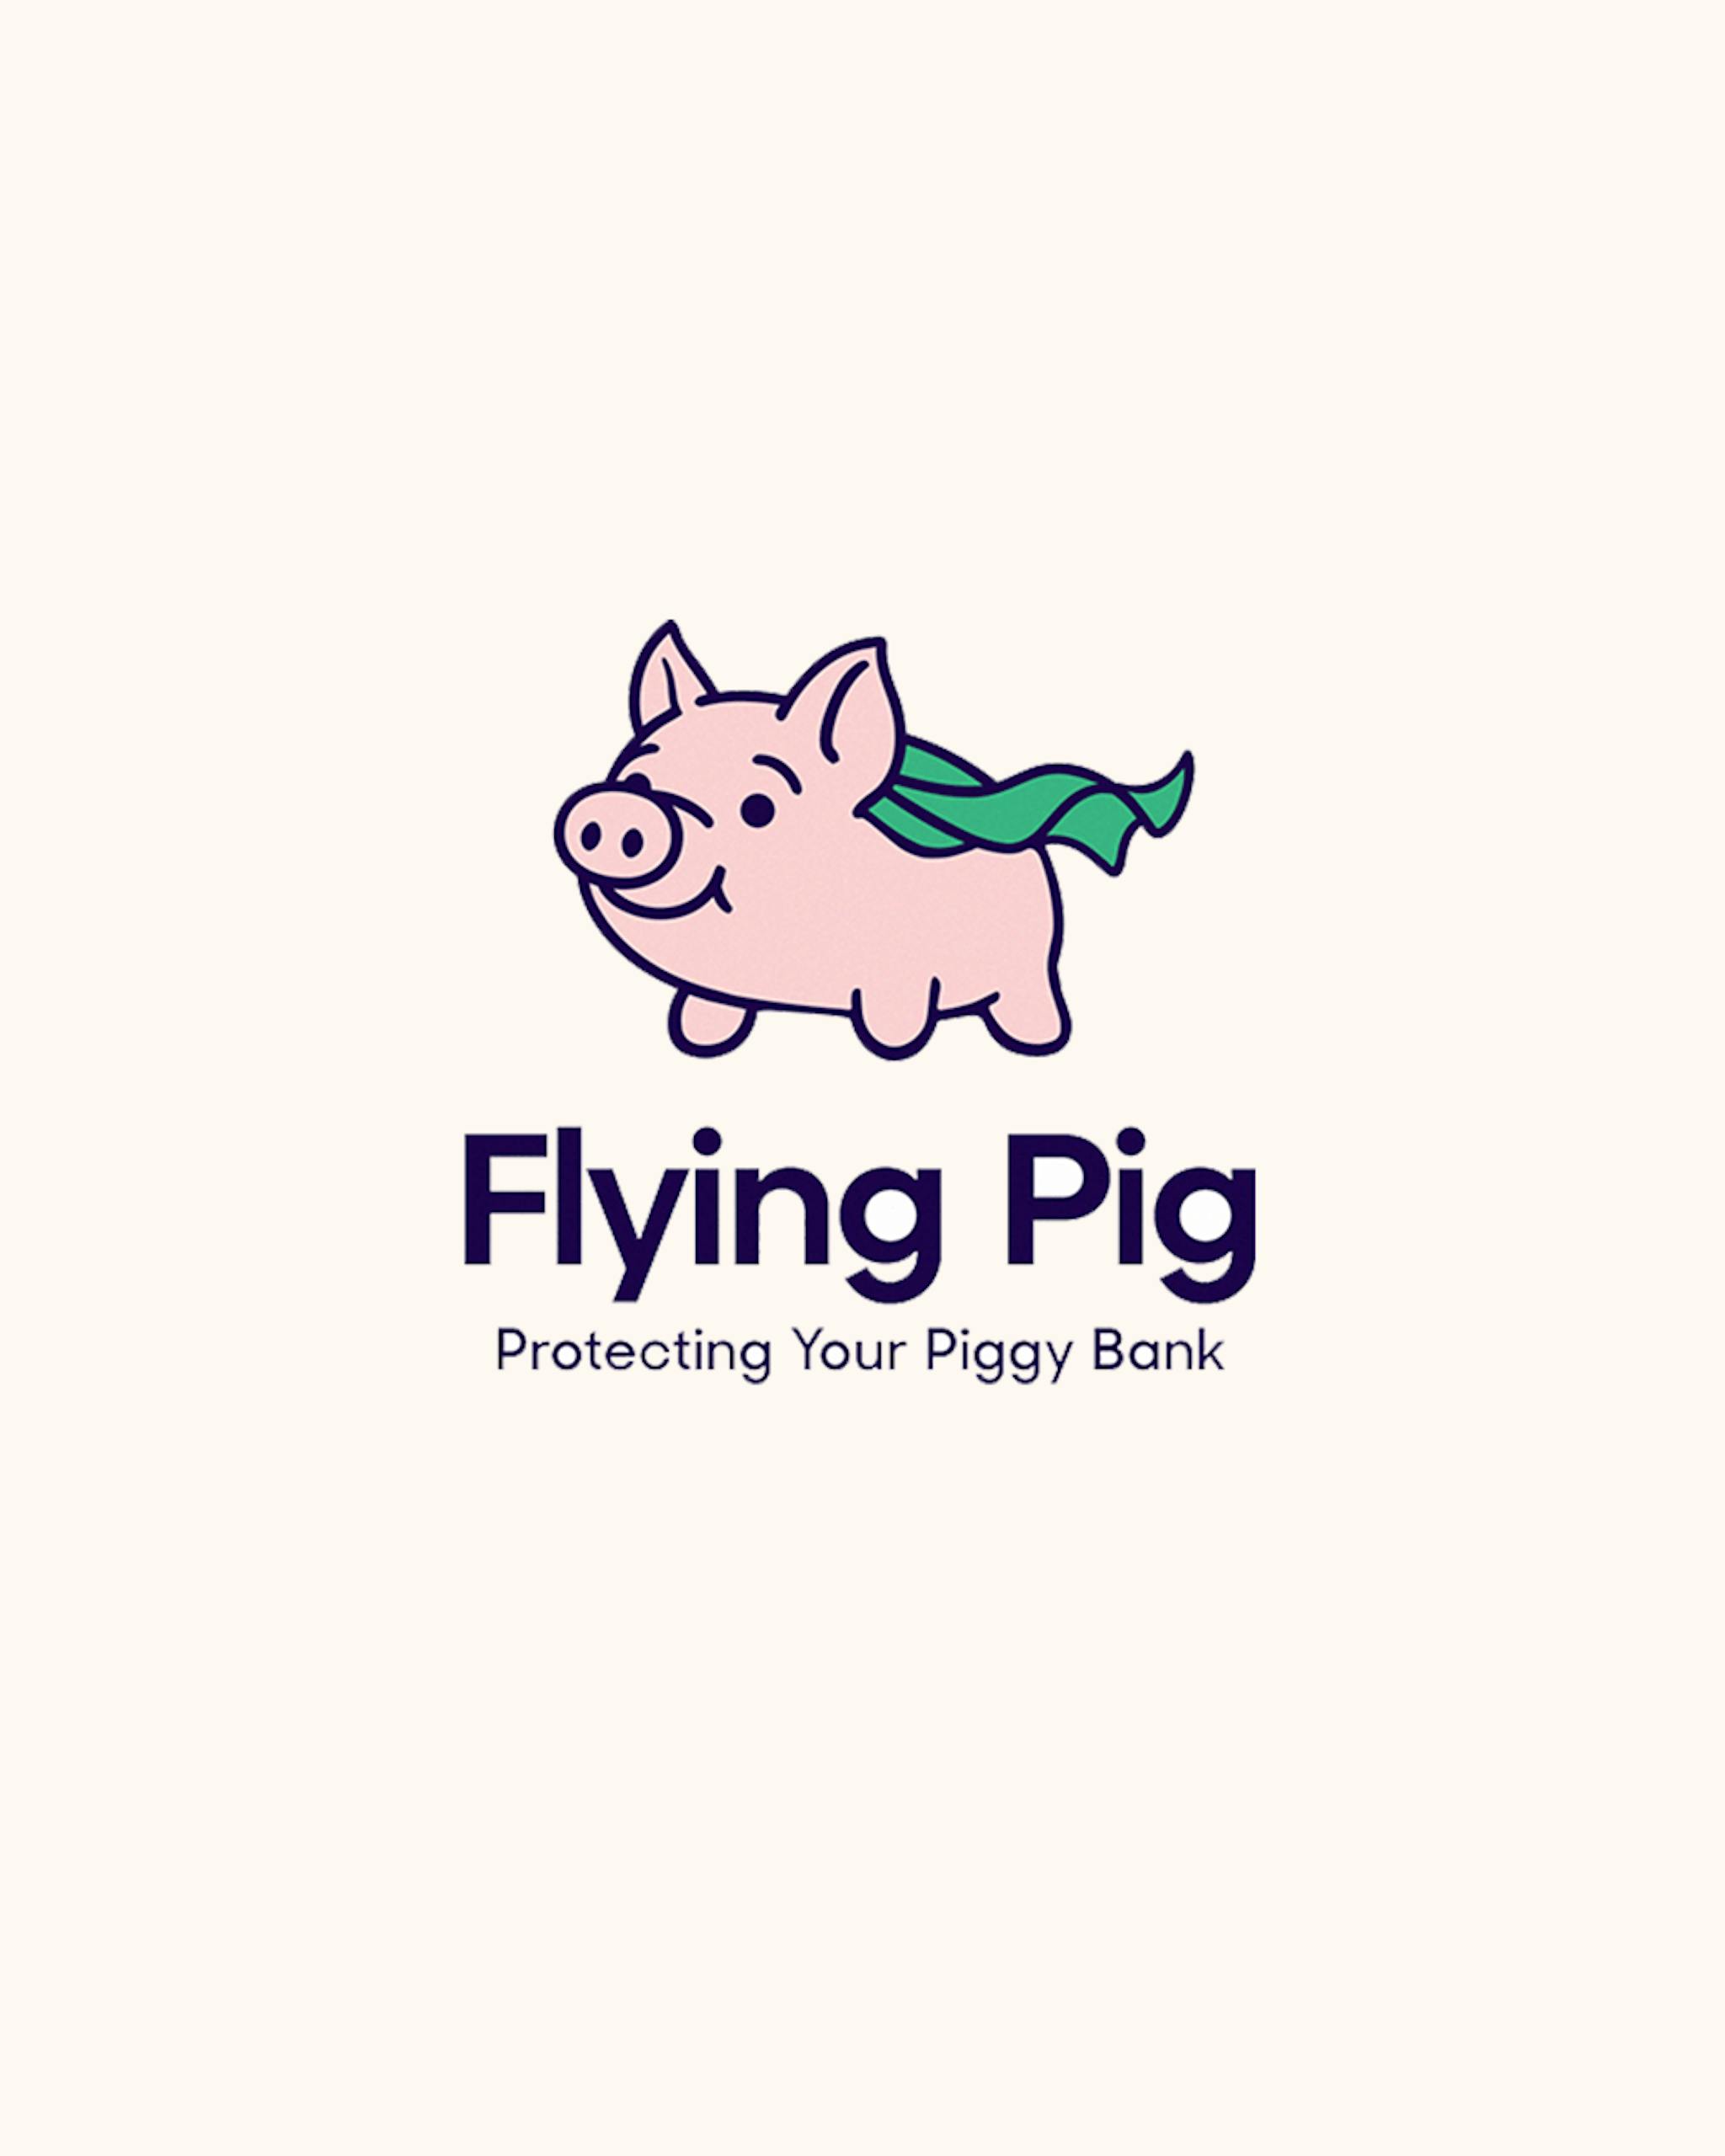 Branding & naming for the Flying Pig brand by the uptown agency